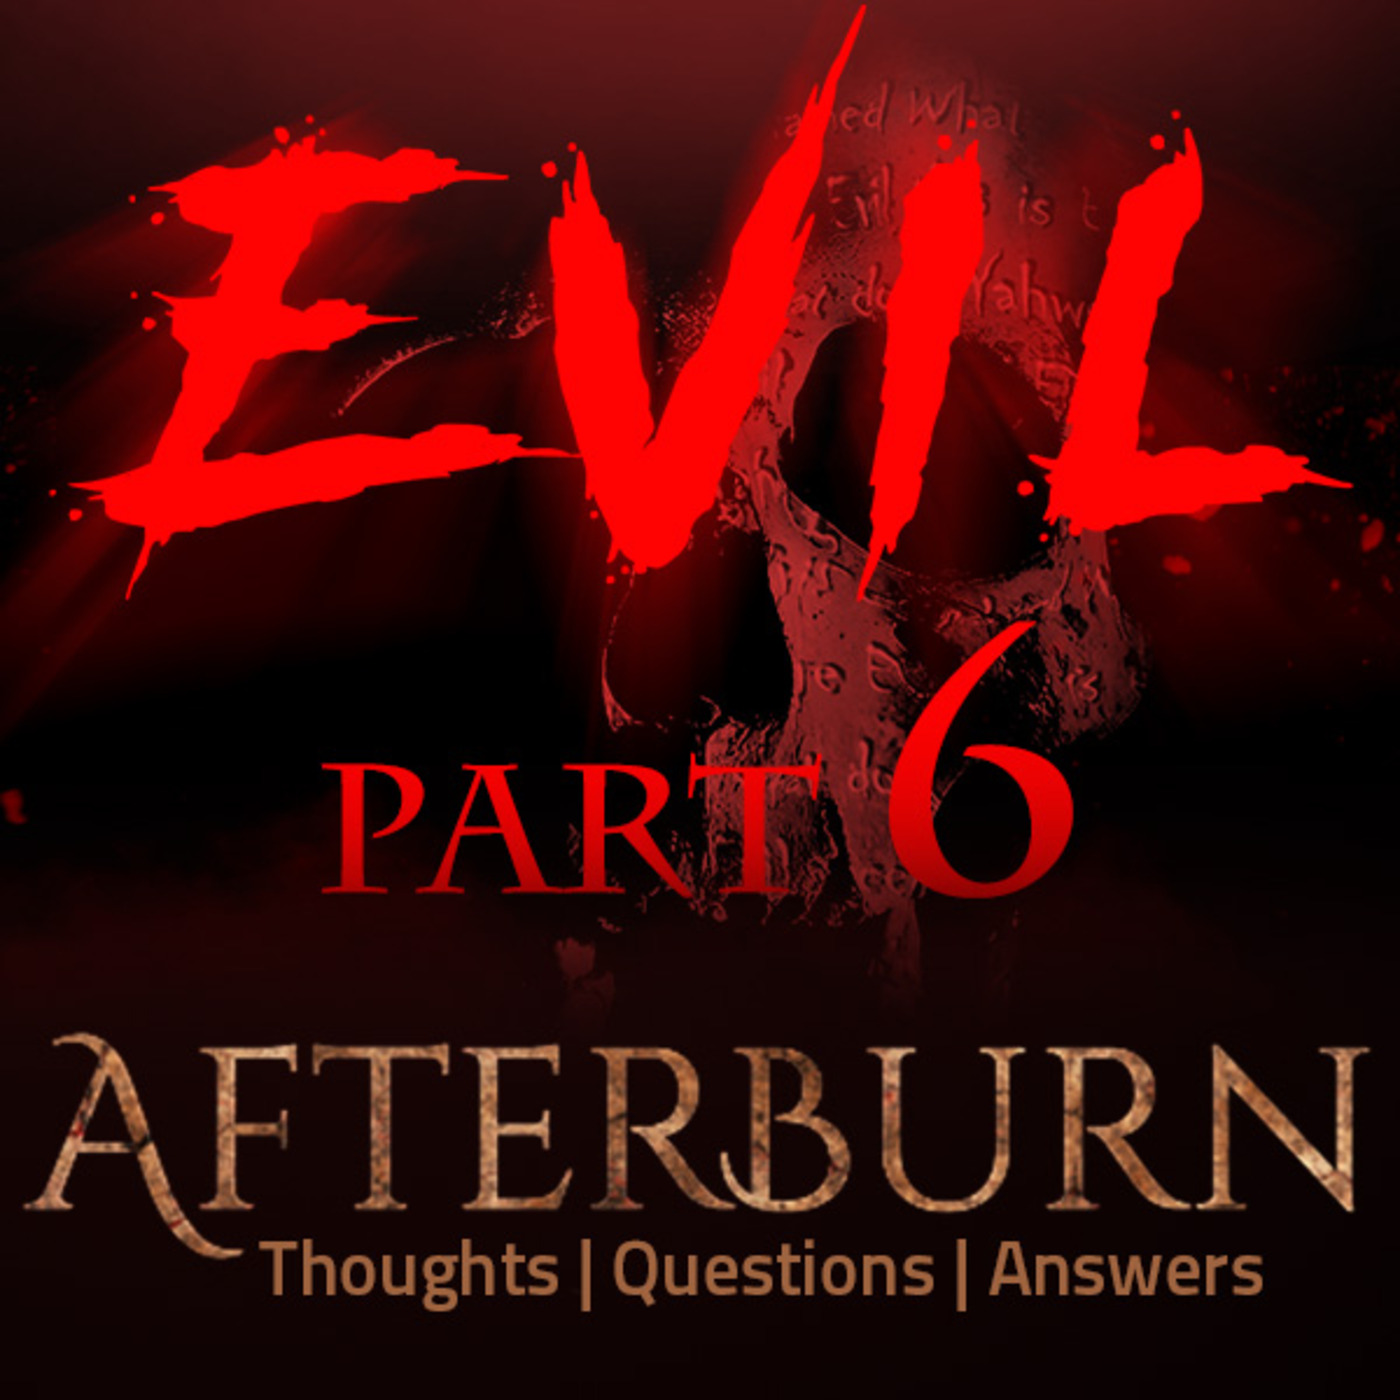 Episode 715: Afterburn | Thoughts, Q&A on Evil | Part 6